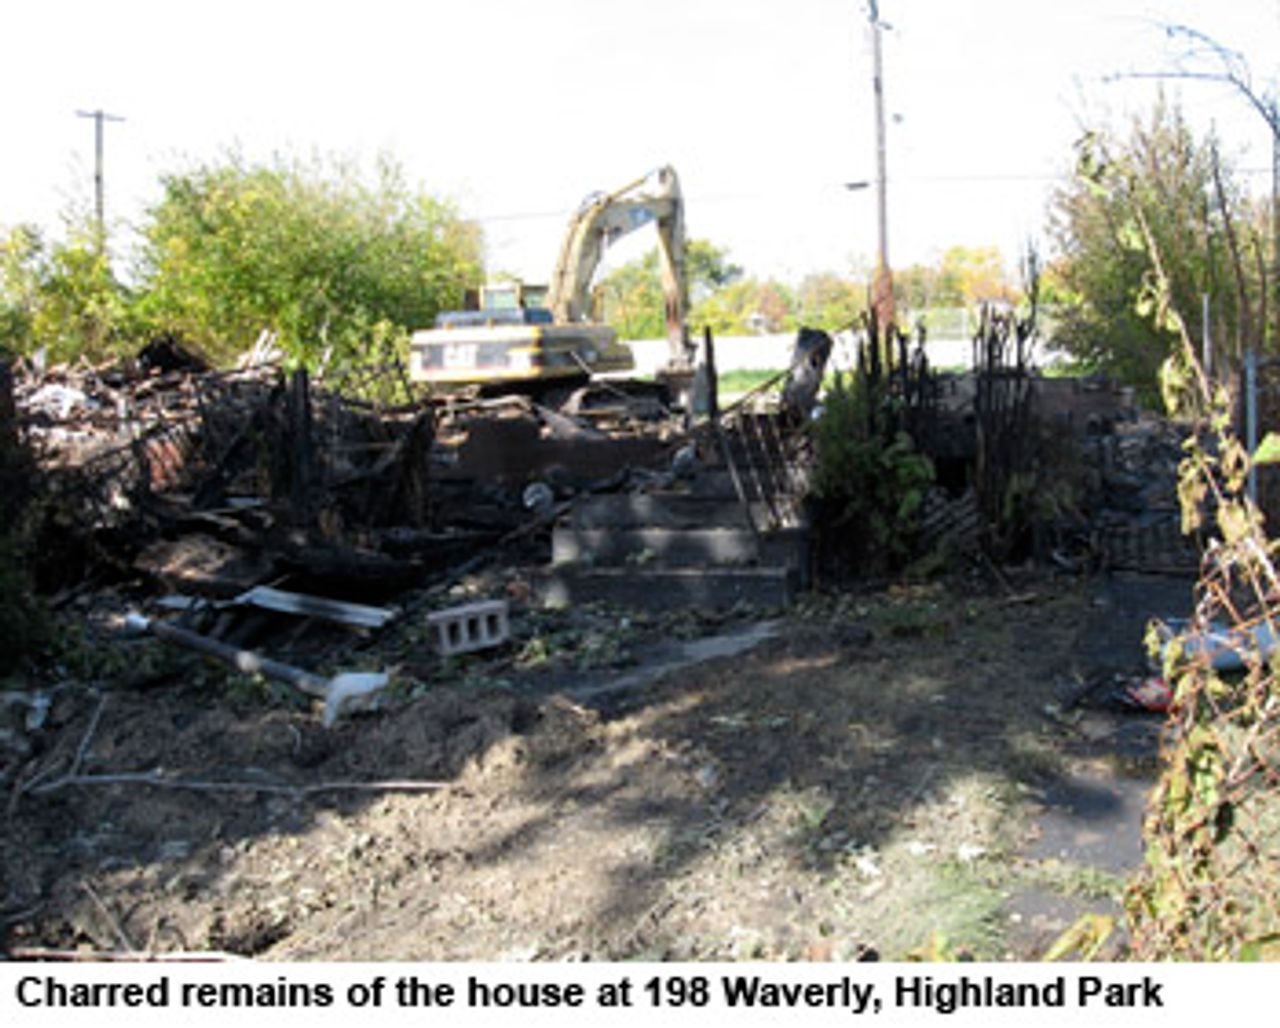 Charred remains of the house at 198 Waverly, Highland Park